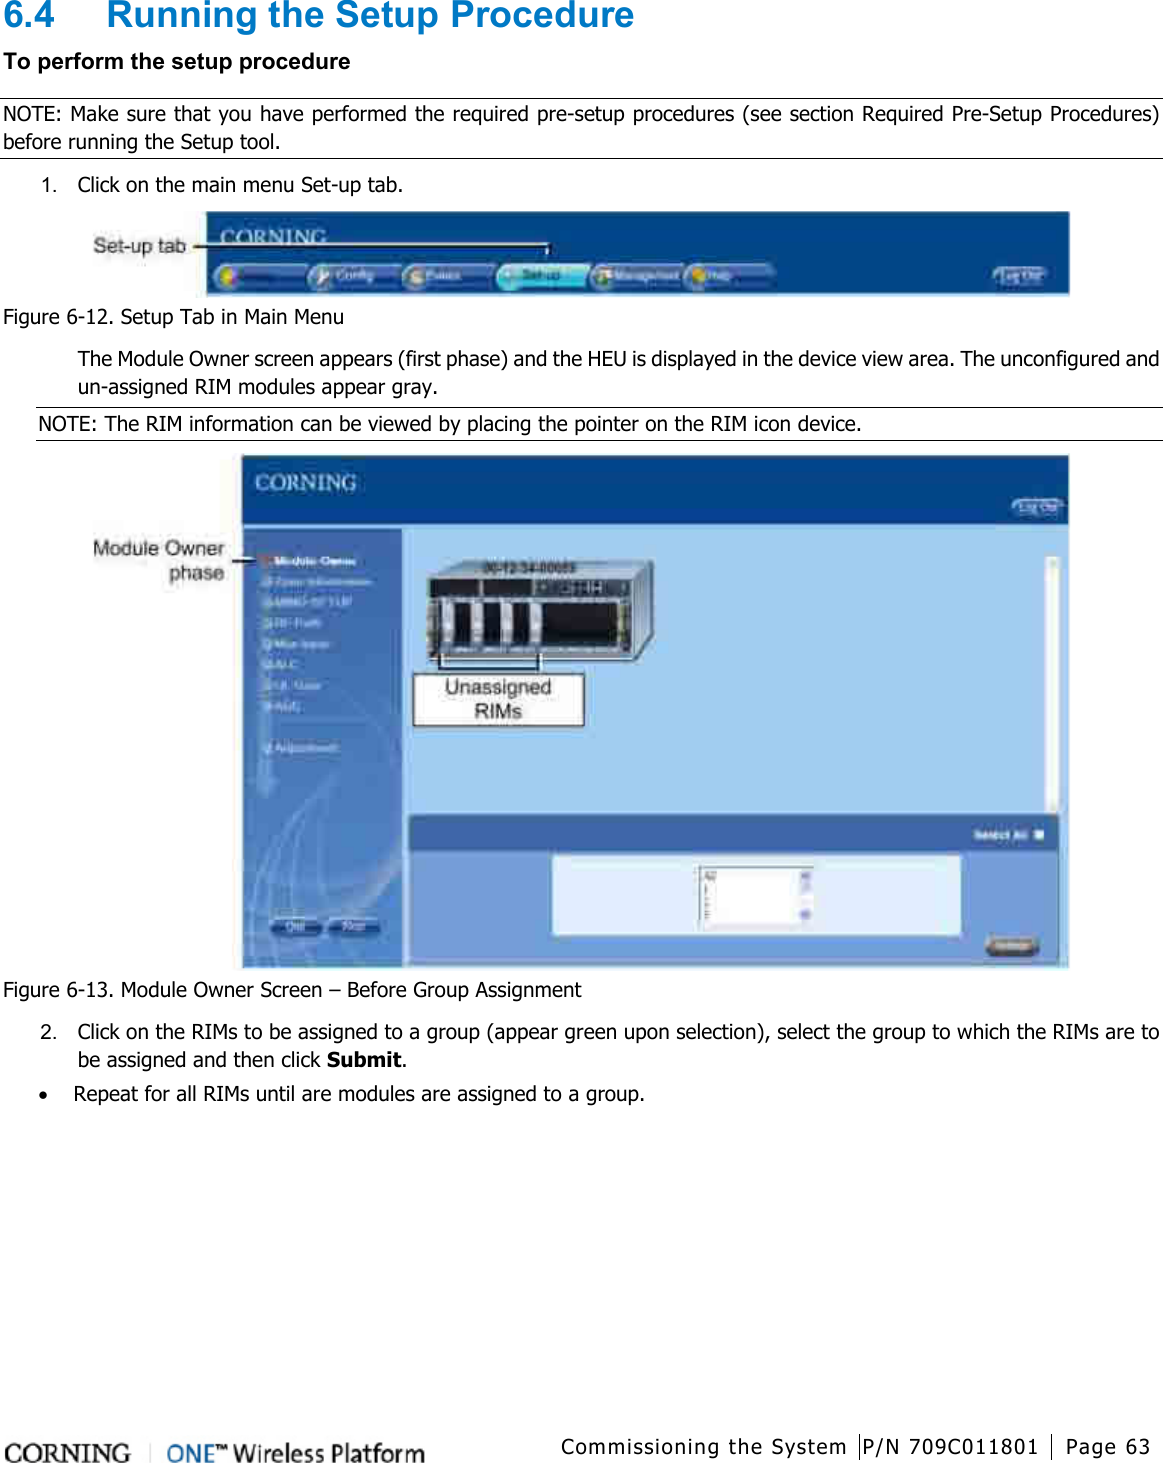  Commissioning the System P/N 709C011801 Page 63   6.4  Running the Setup Procedure To perform the setup procedure NOTE: Make sure that you have performed the required pre-setup procedures (see section Required Pre-Setup Procedures) before running the Setup tool. 1.  Click on the main menu Set-up tab.    Figure  6-12. Setup Tab in Main Menu The Module Owner screen appears (first phase) and the HEU is displayed in the device view area. The unconfigured and un-assigned RIM modules appear gray.   NOTE: The RIM information can be viewed by placing the pointer on the RIM icon device.  Figure  6-13. Module Owner Screen – Before Group Assignment 2.  Click on the RIMs to be assigned to a group (appear green upon selection), select the group to which the RIMs are to be assigned and then click Submit. • Repeat for all RIMs until are modules are assigned to a group. 